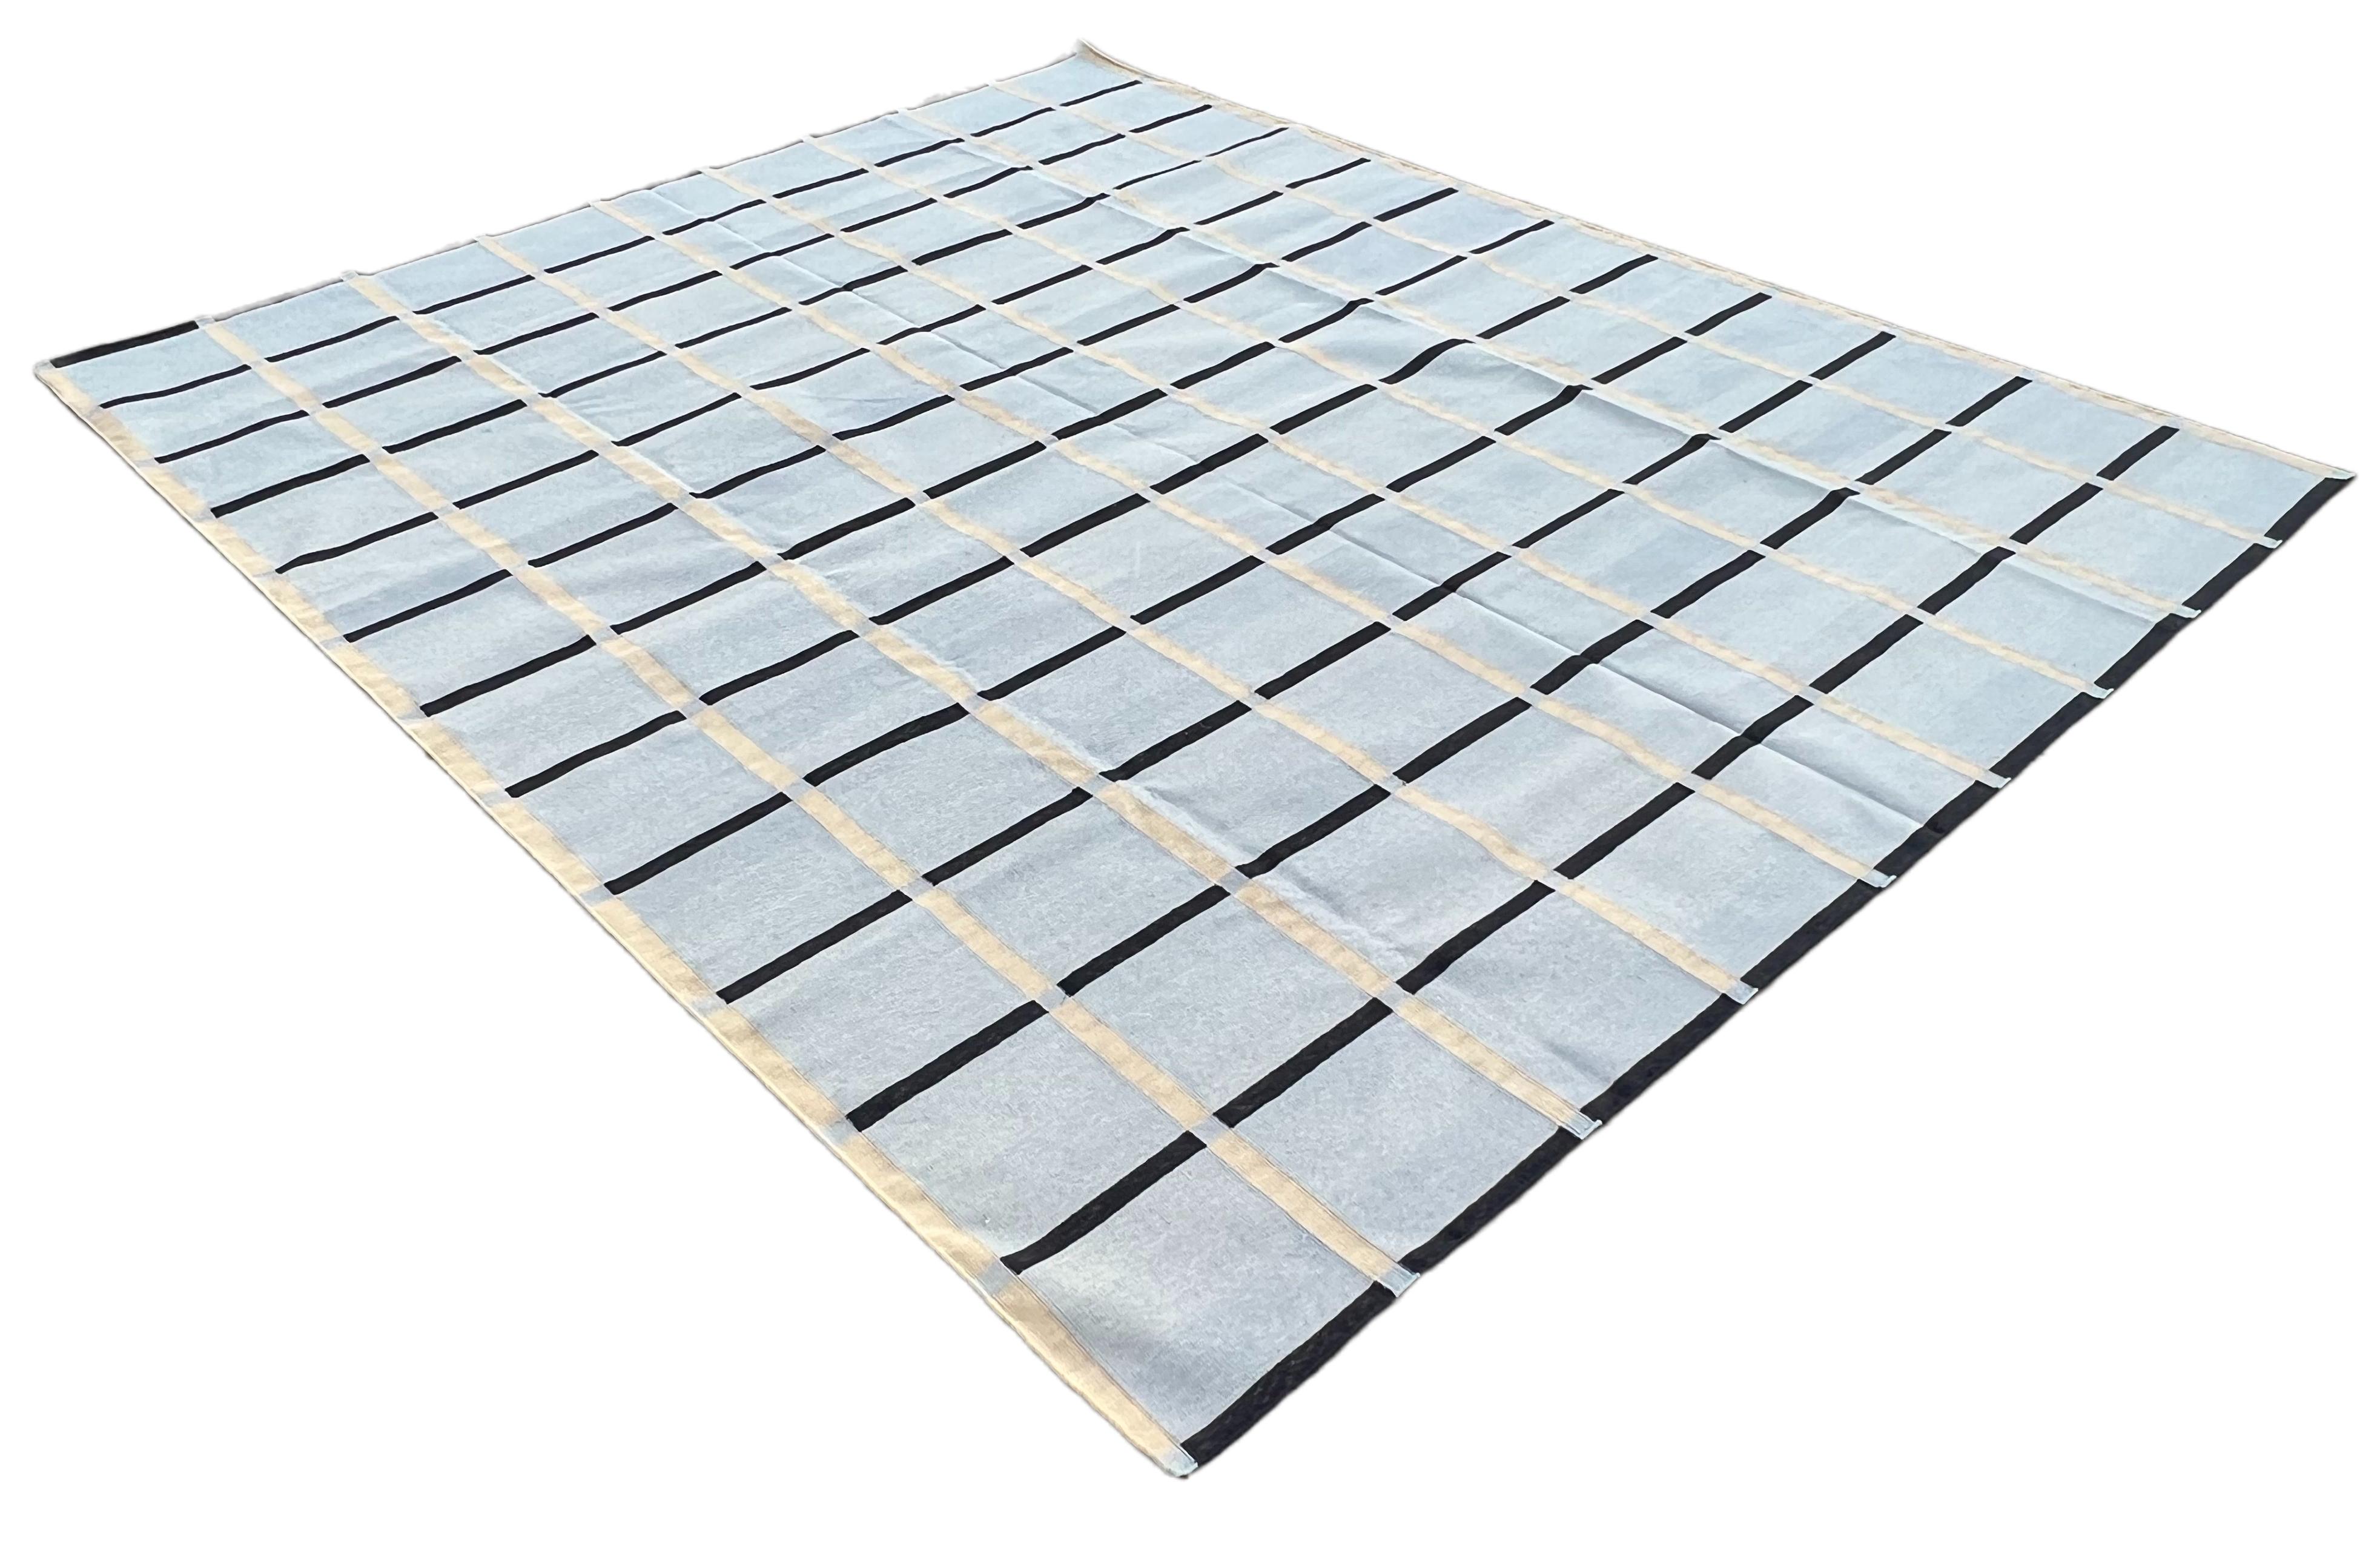 Cotton Vegetable Dyed Area Rug, Sky Blue, Black & Beige Windowpane Checked Indian Rug-8'x10'
These special flat-weave dhurries are hand-woven with 15 ply 100% cotton yarn. Due to the special manufacturing techniques used to create our rugs, the size